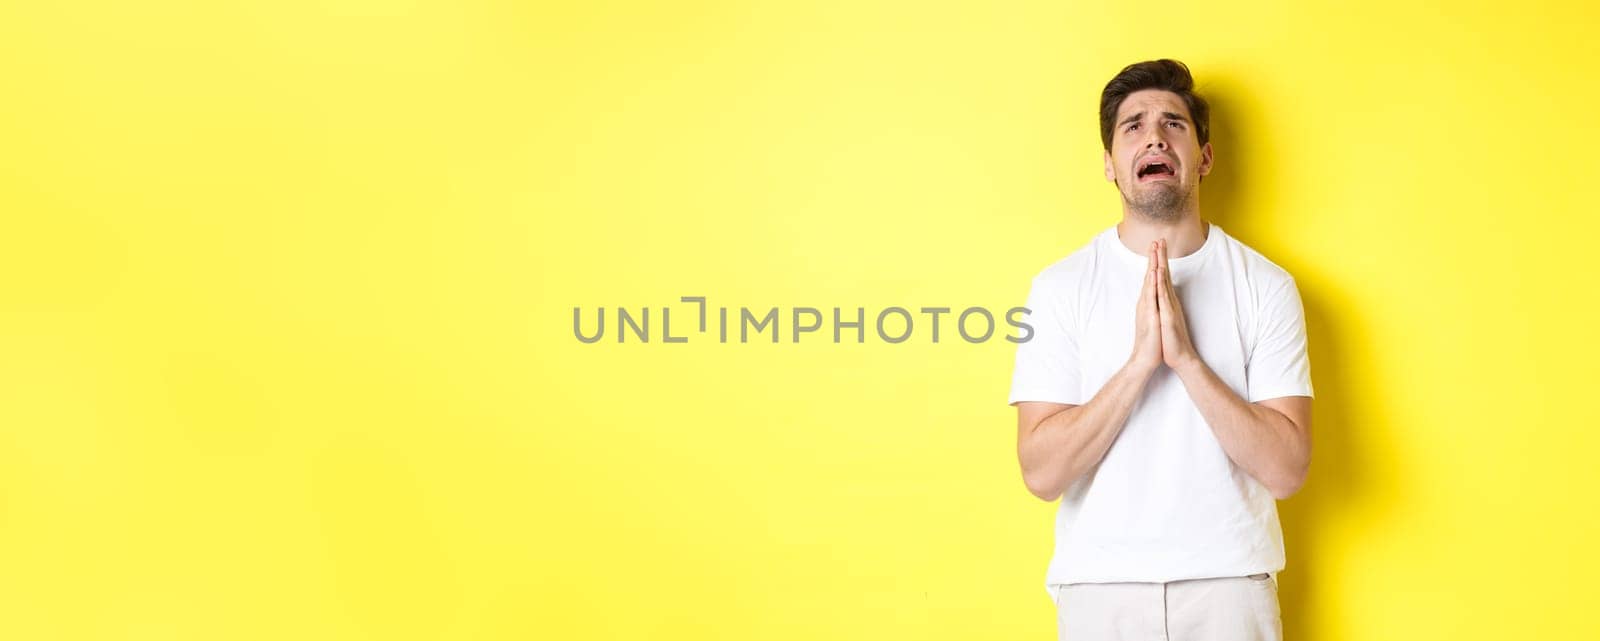 Desperate man pleading God, holding hands in pray and looking up distressed, standing over yellow background. Copy space